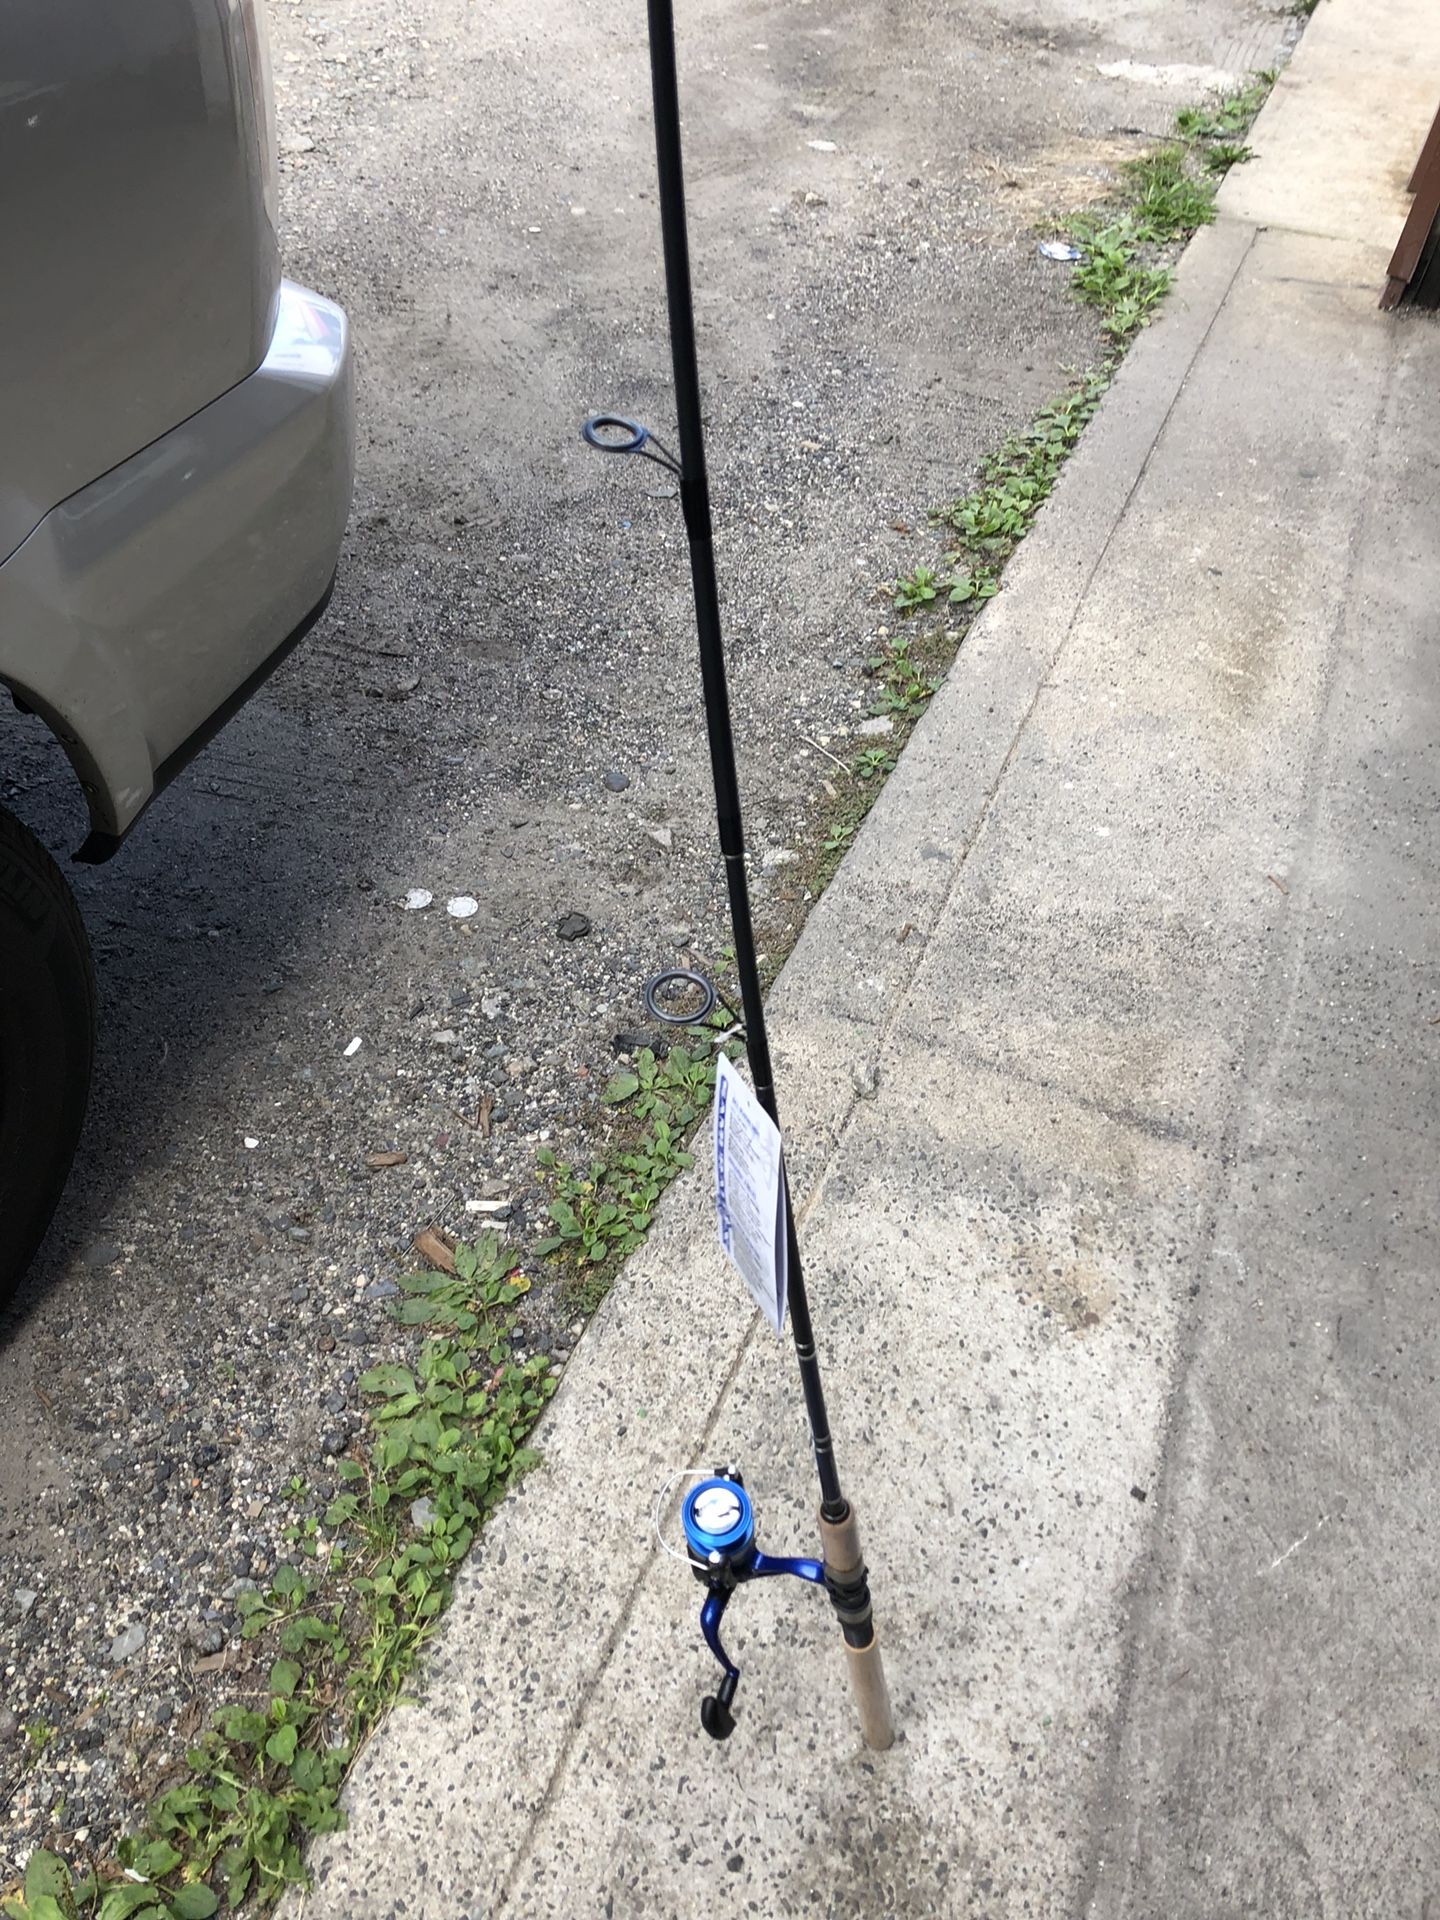 Fishing pole with reel 7ft